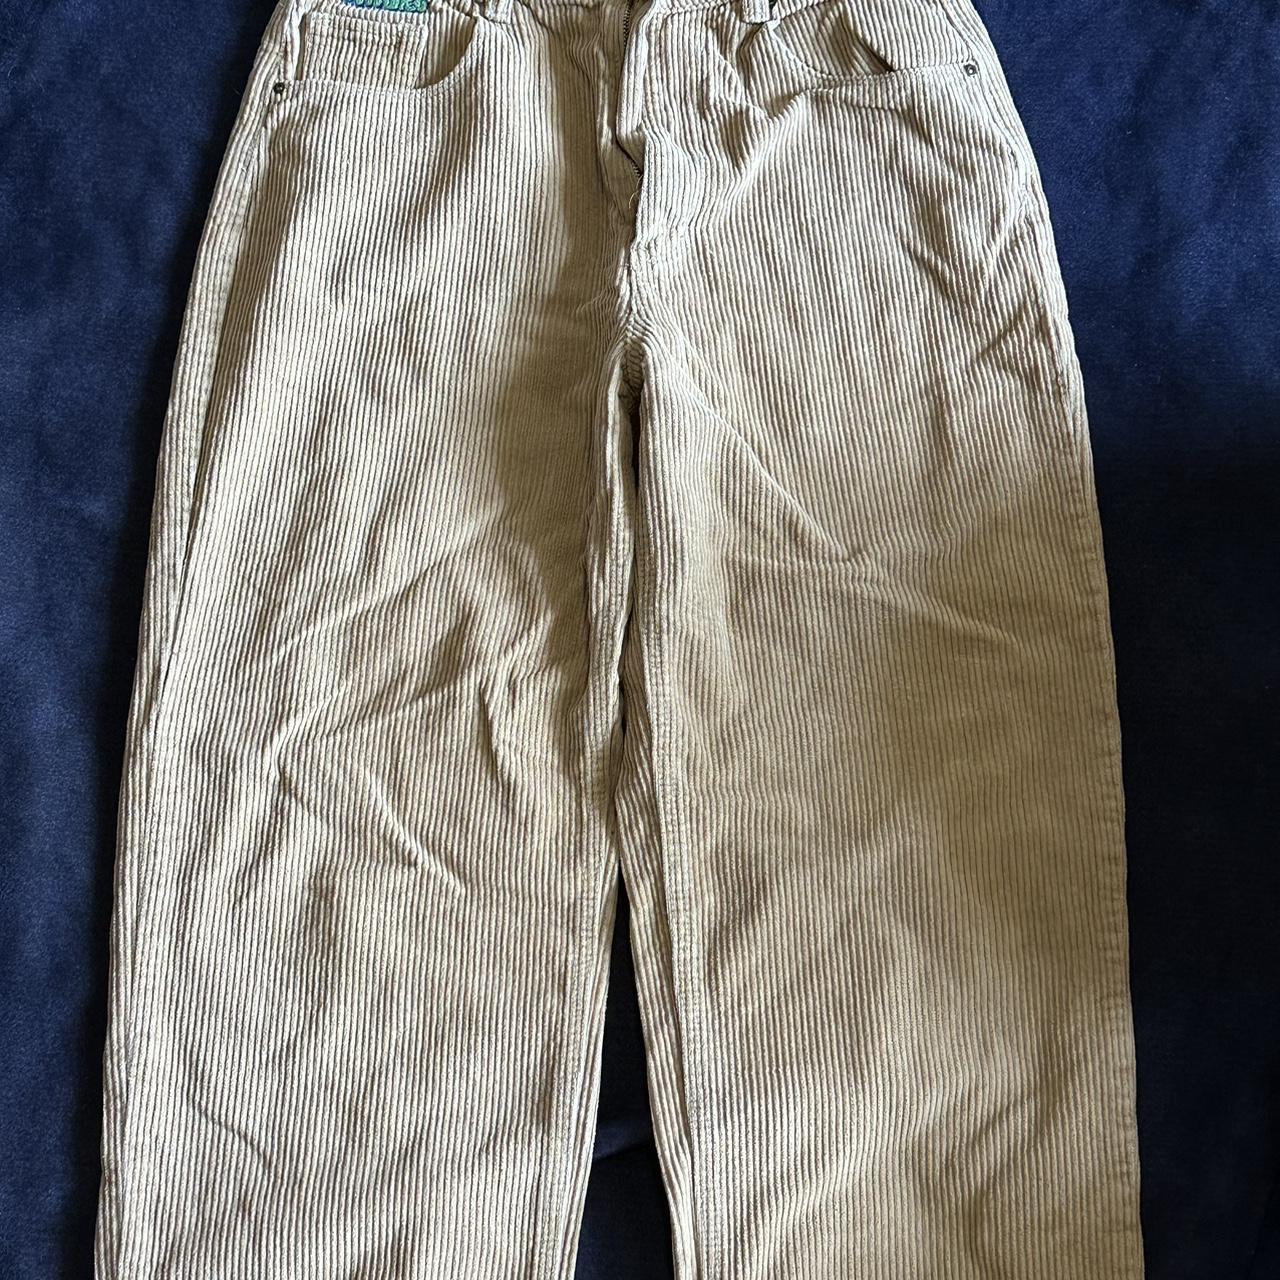 Empyre tan pants, worn a few times but they look... - Depop